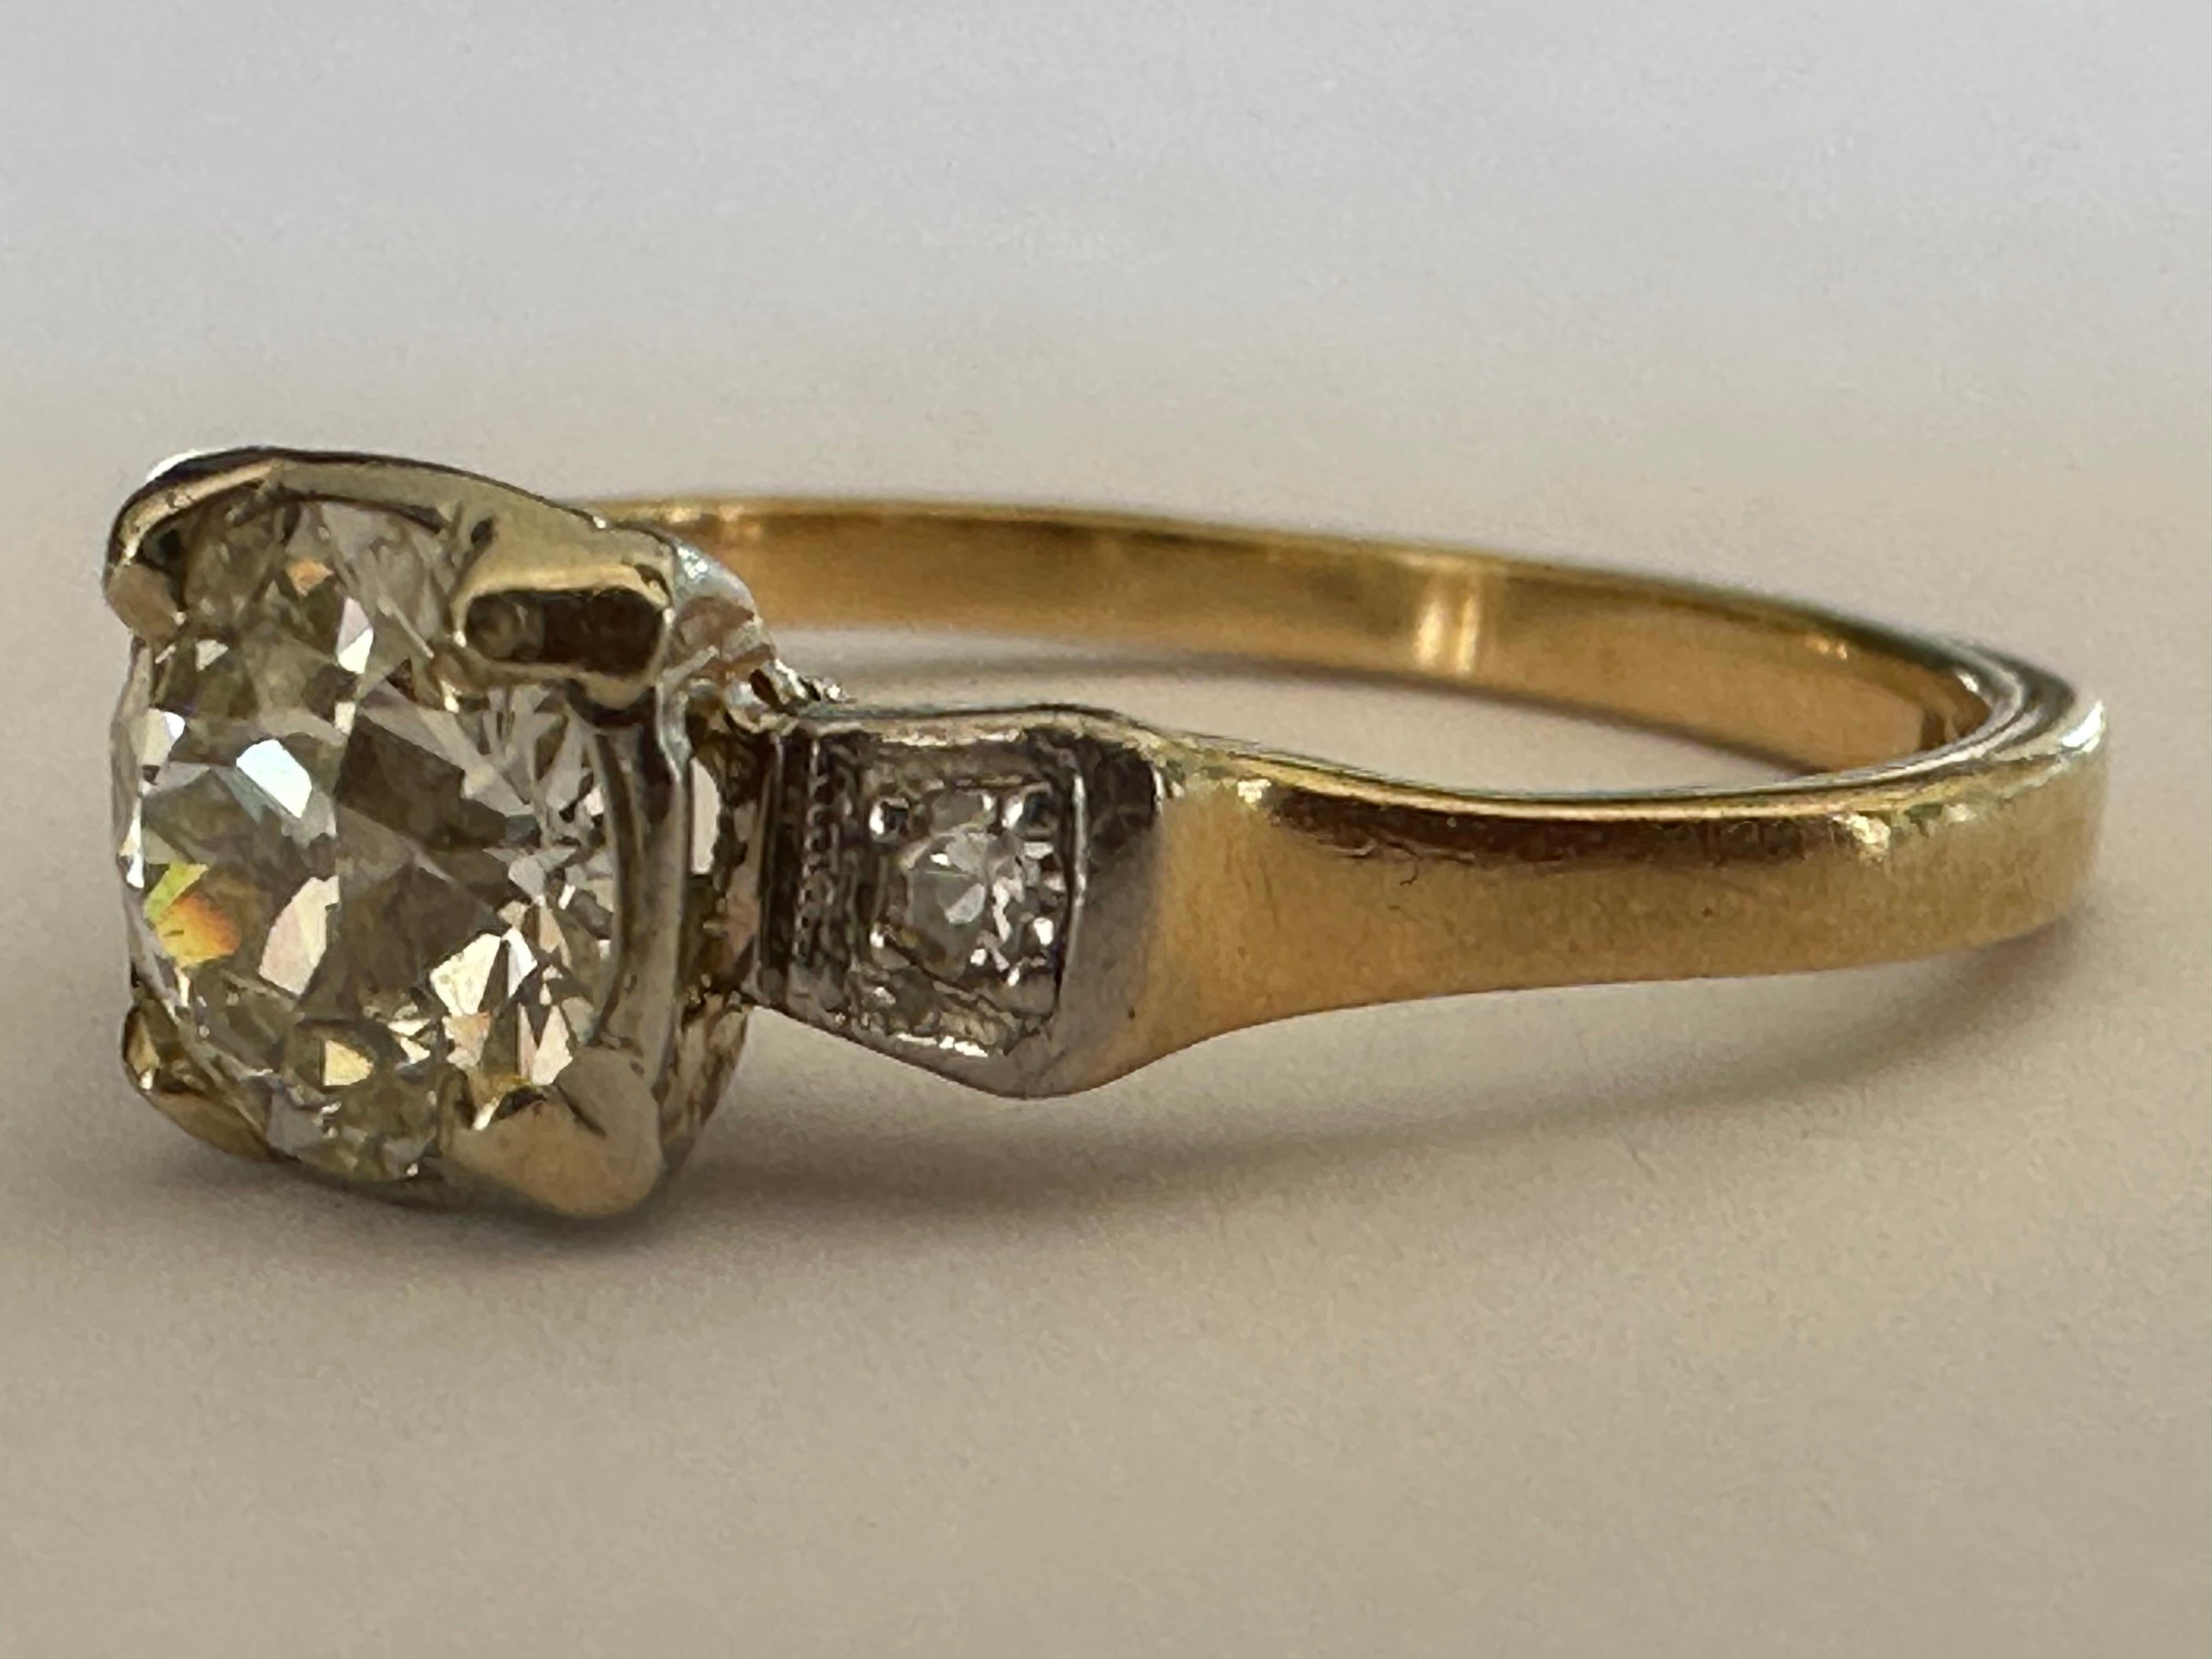 Crafted in the 1940s, this classic three-stone engagement ring features a bold Old European cut diamond center stone measuring approximately 1.00 carat closely set between two single cut diamonds. Set in 14K white and yellow gold. 
